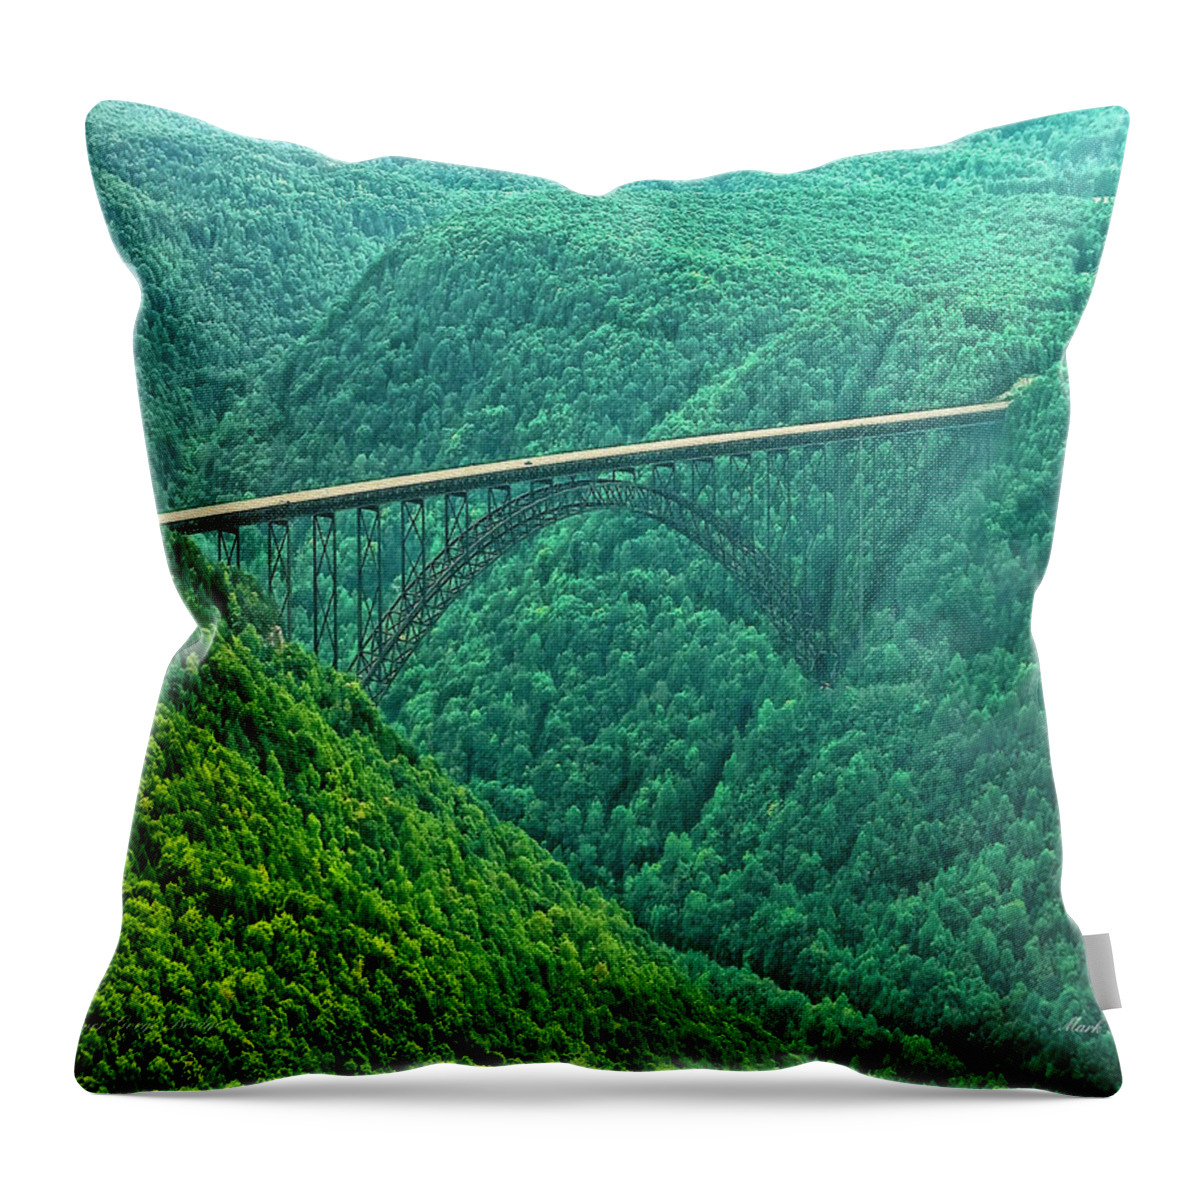 Scenicfotos Throw Pillow featuring the photograph New River Gorge Bridge by Mark Allen